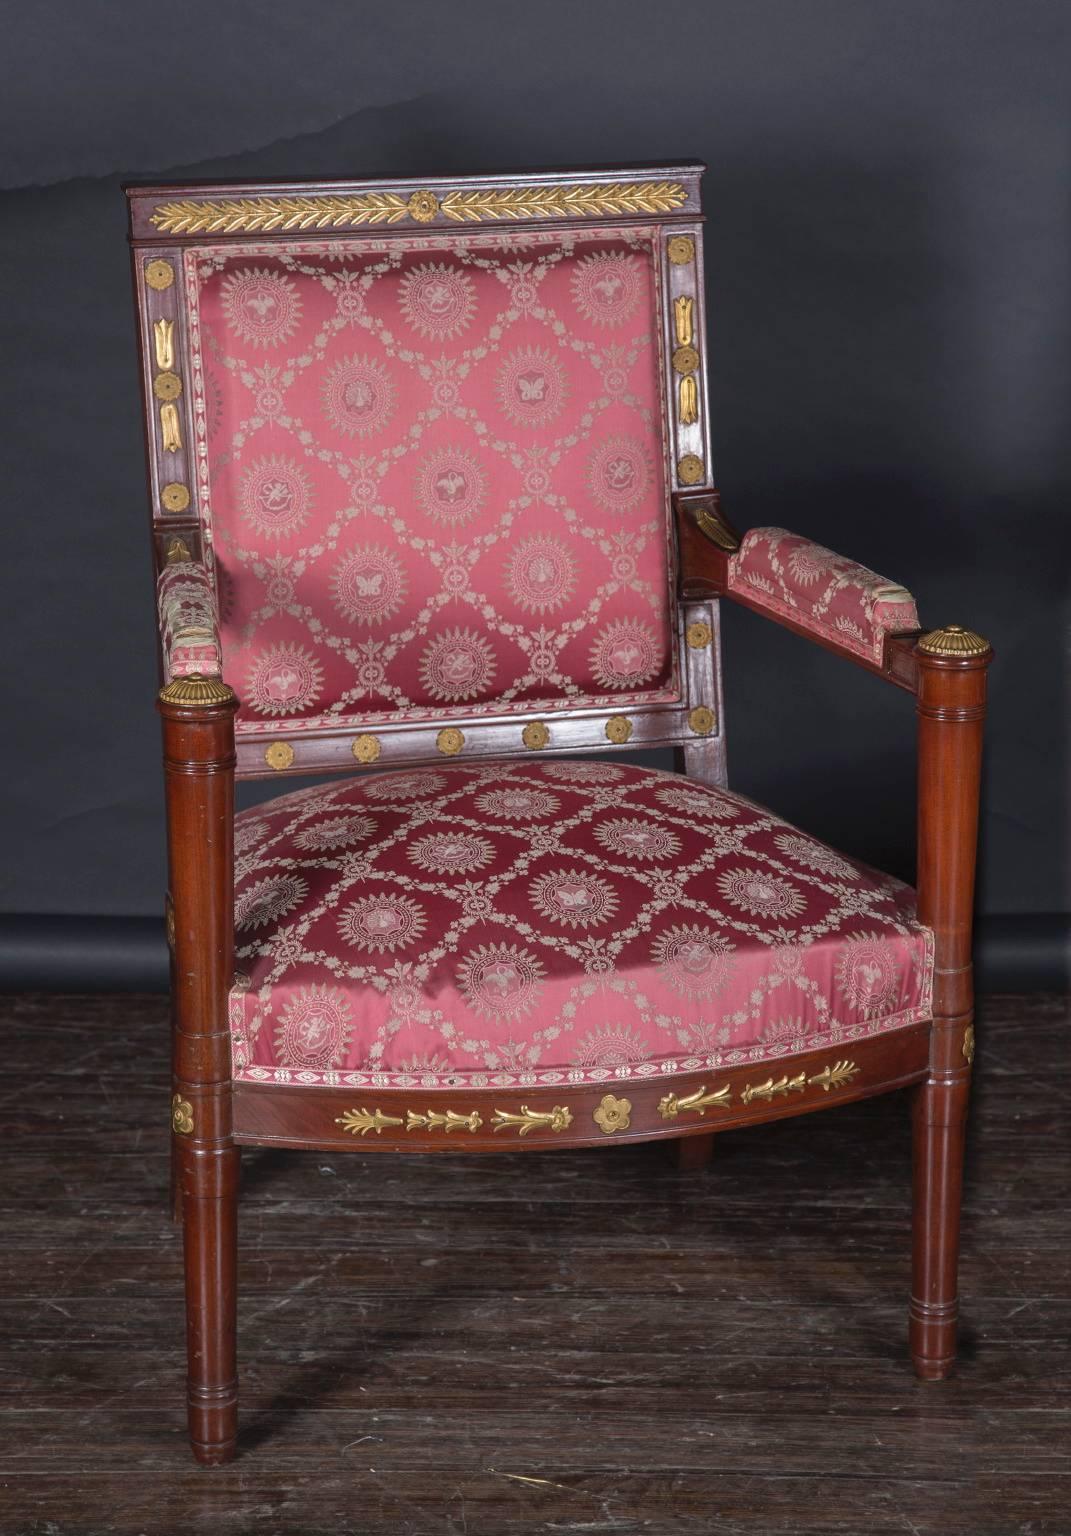 This beautiful pair of French Napoleon III open arm chairs are made of mahogany in the Empire manner. The pair dates back to the 19th century and is embellished with bronze d’ore laurel leaves and floriate d’ore mounts throughout. Note the top of